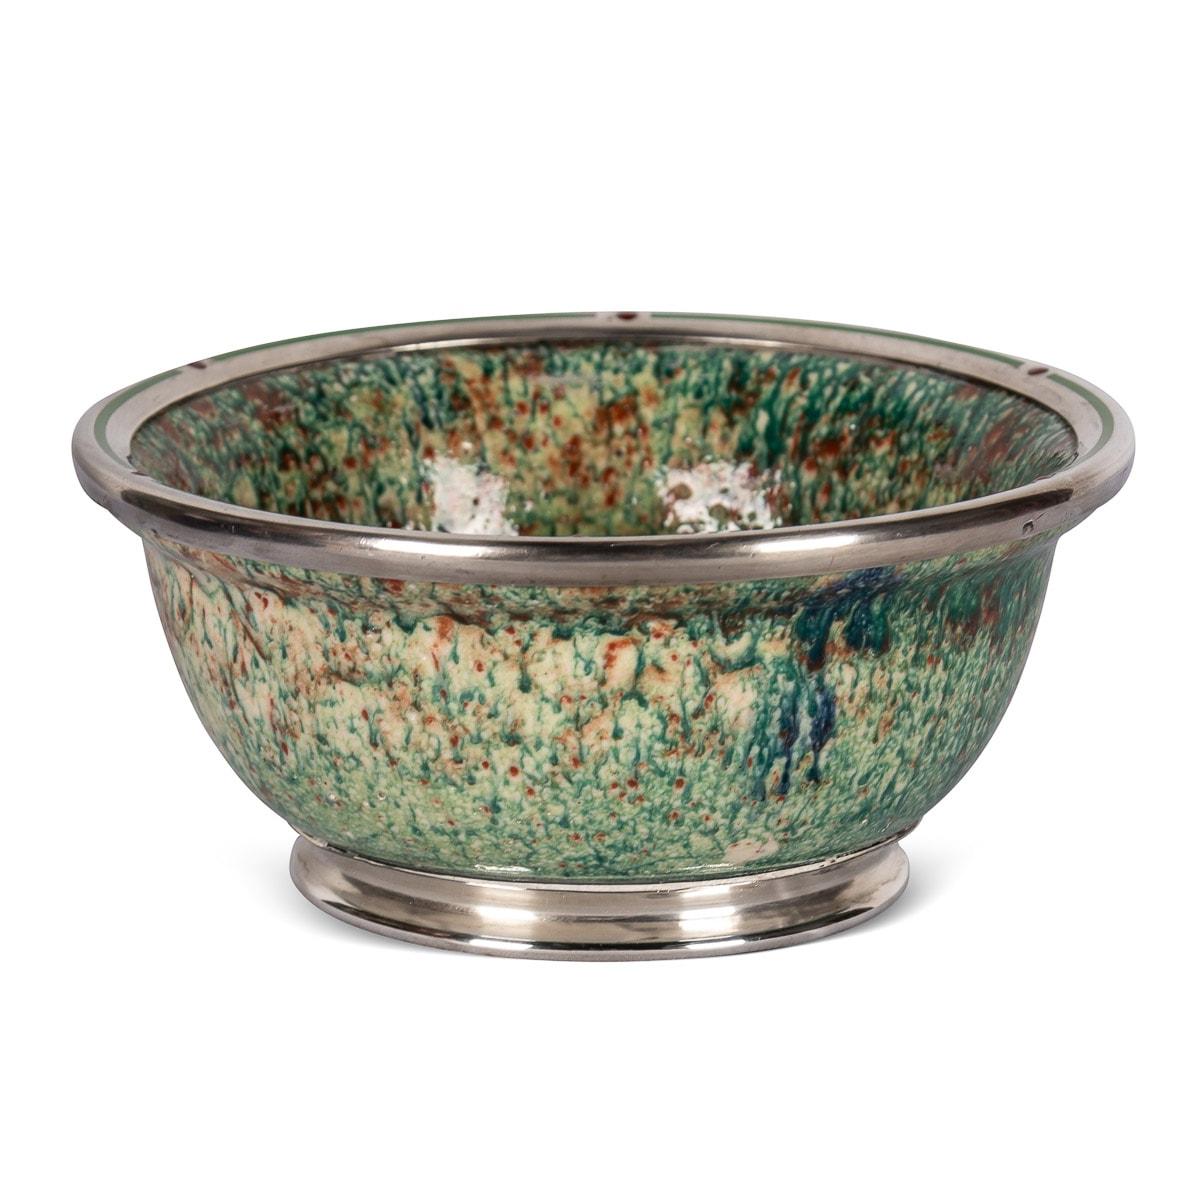 Antique early-20th Century silver mounted bowl, flambé glazed ceramic bowl in a multitude of colours and silver mounted, applied with green and red champlevé enamel. Signed underneath Boulognes, Desvres Boulogne s/Mer. Hallmarked French silver